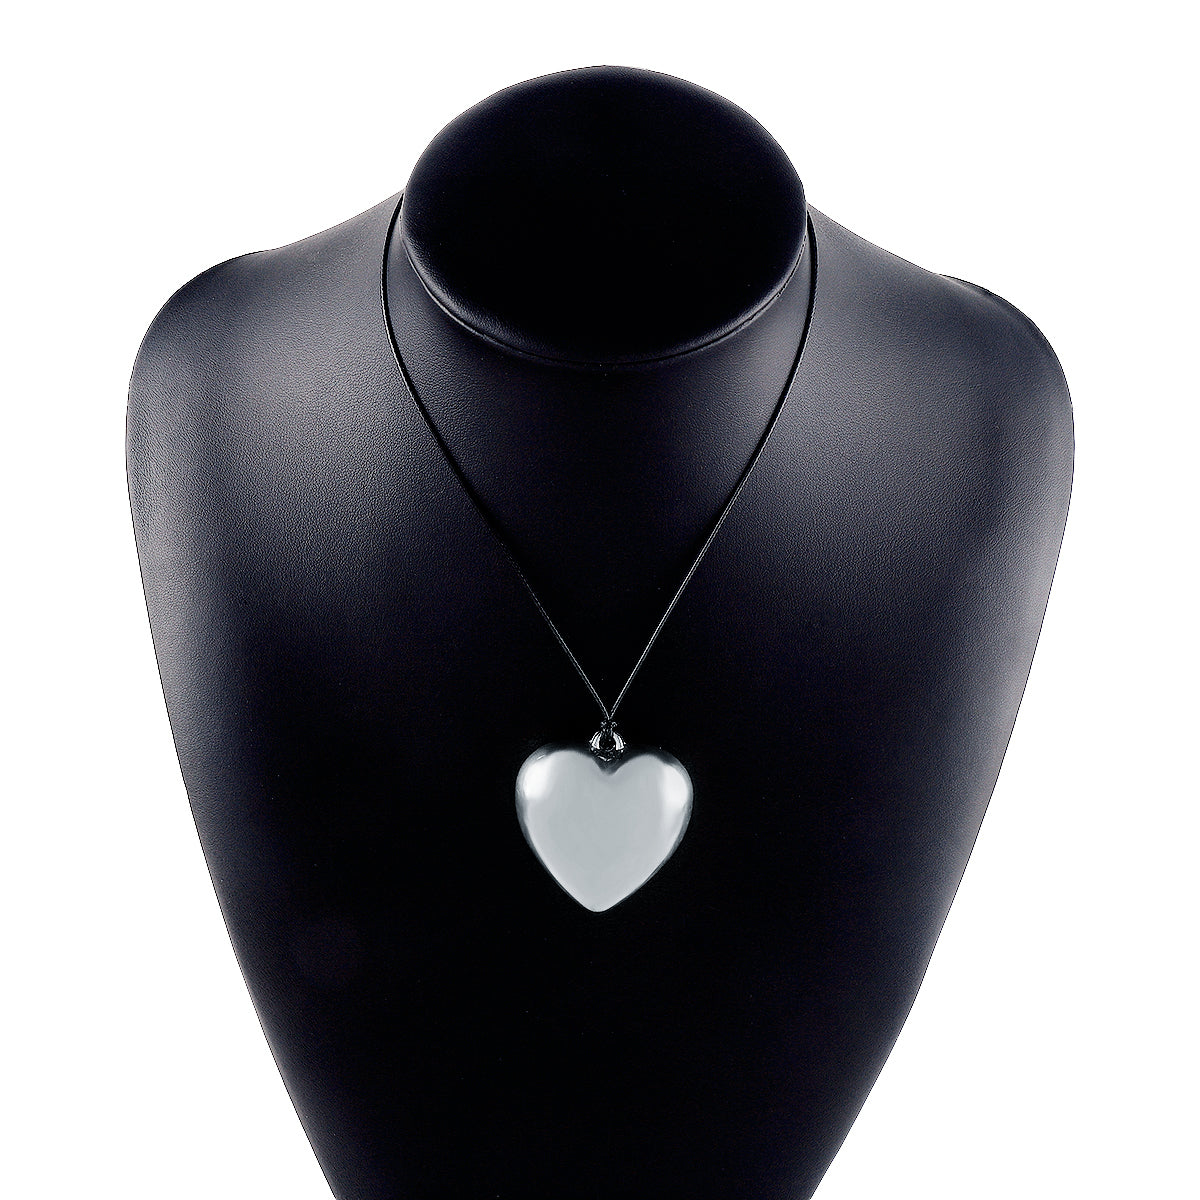 Vintage Style Simple Style Heart Shape Alloy Leather Rope Handmade Three-dimensional Women's Pendant Necklace